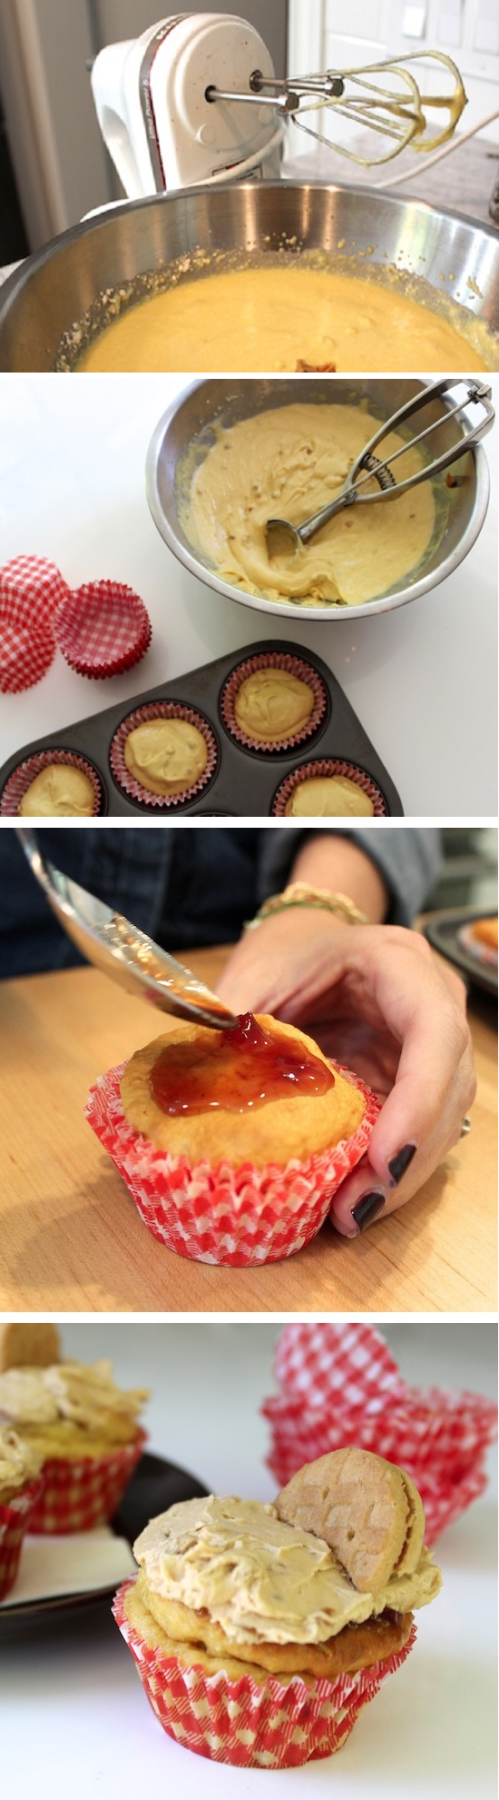 penut butter jelly cupcakes recipe by cupcakepedia